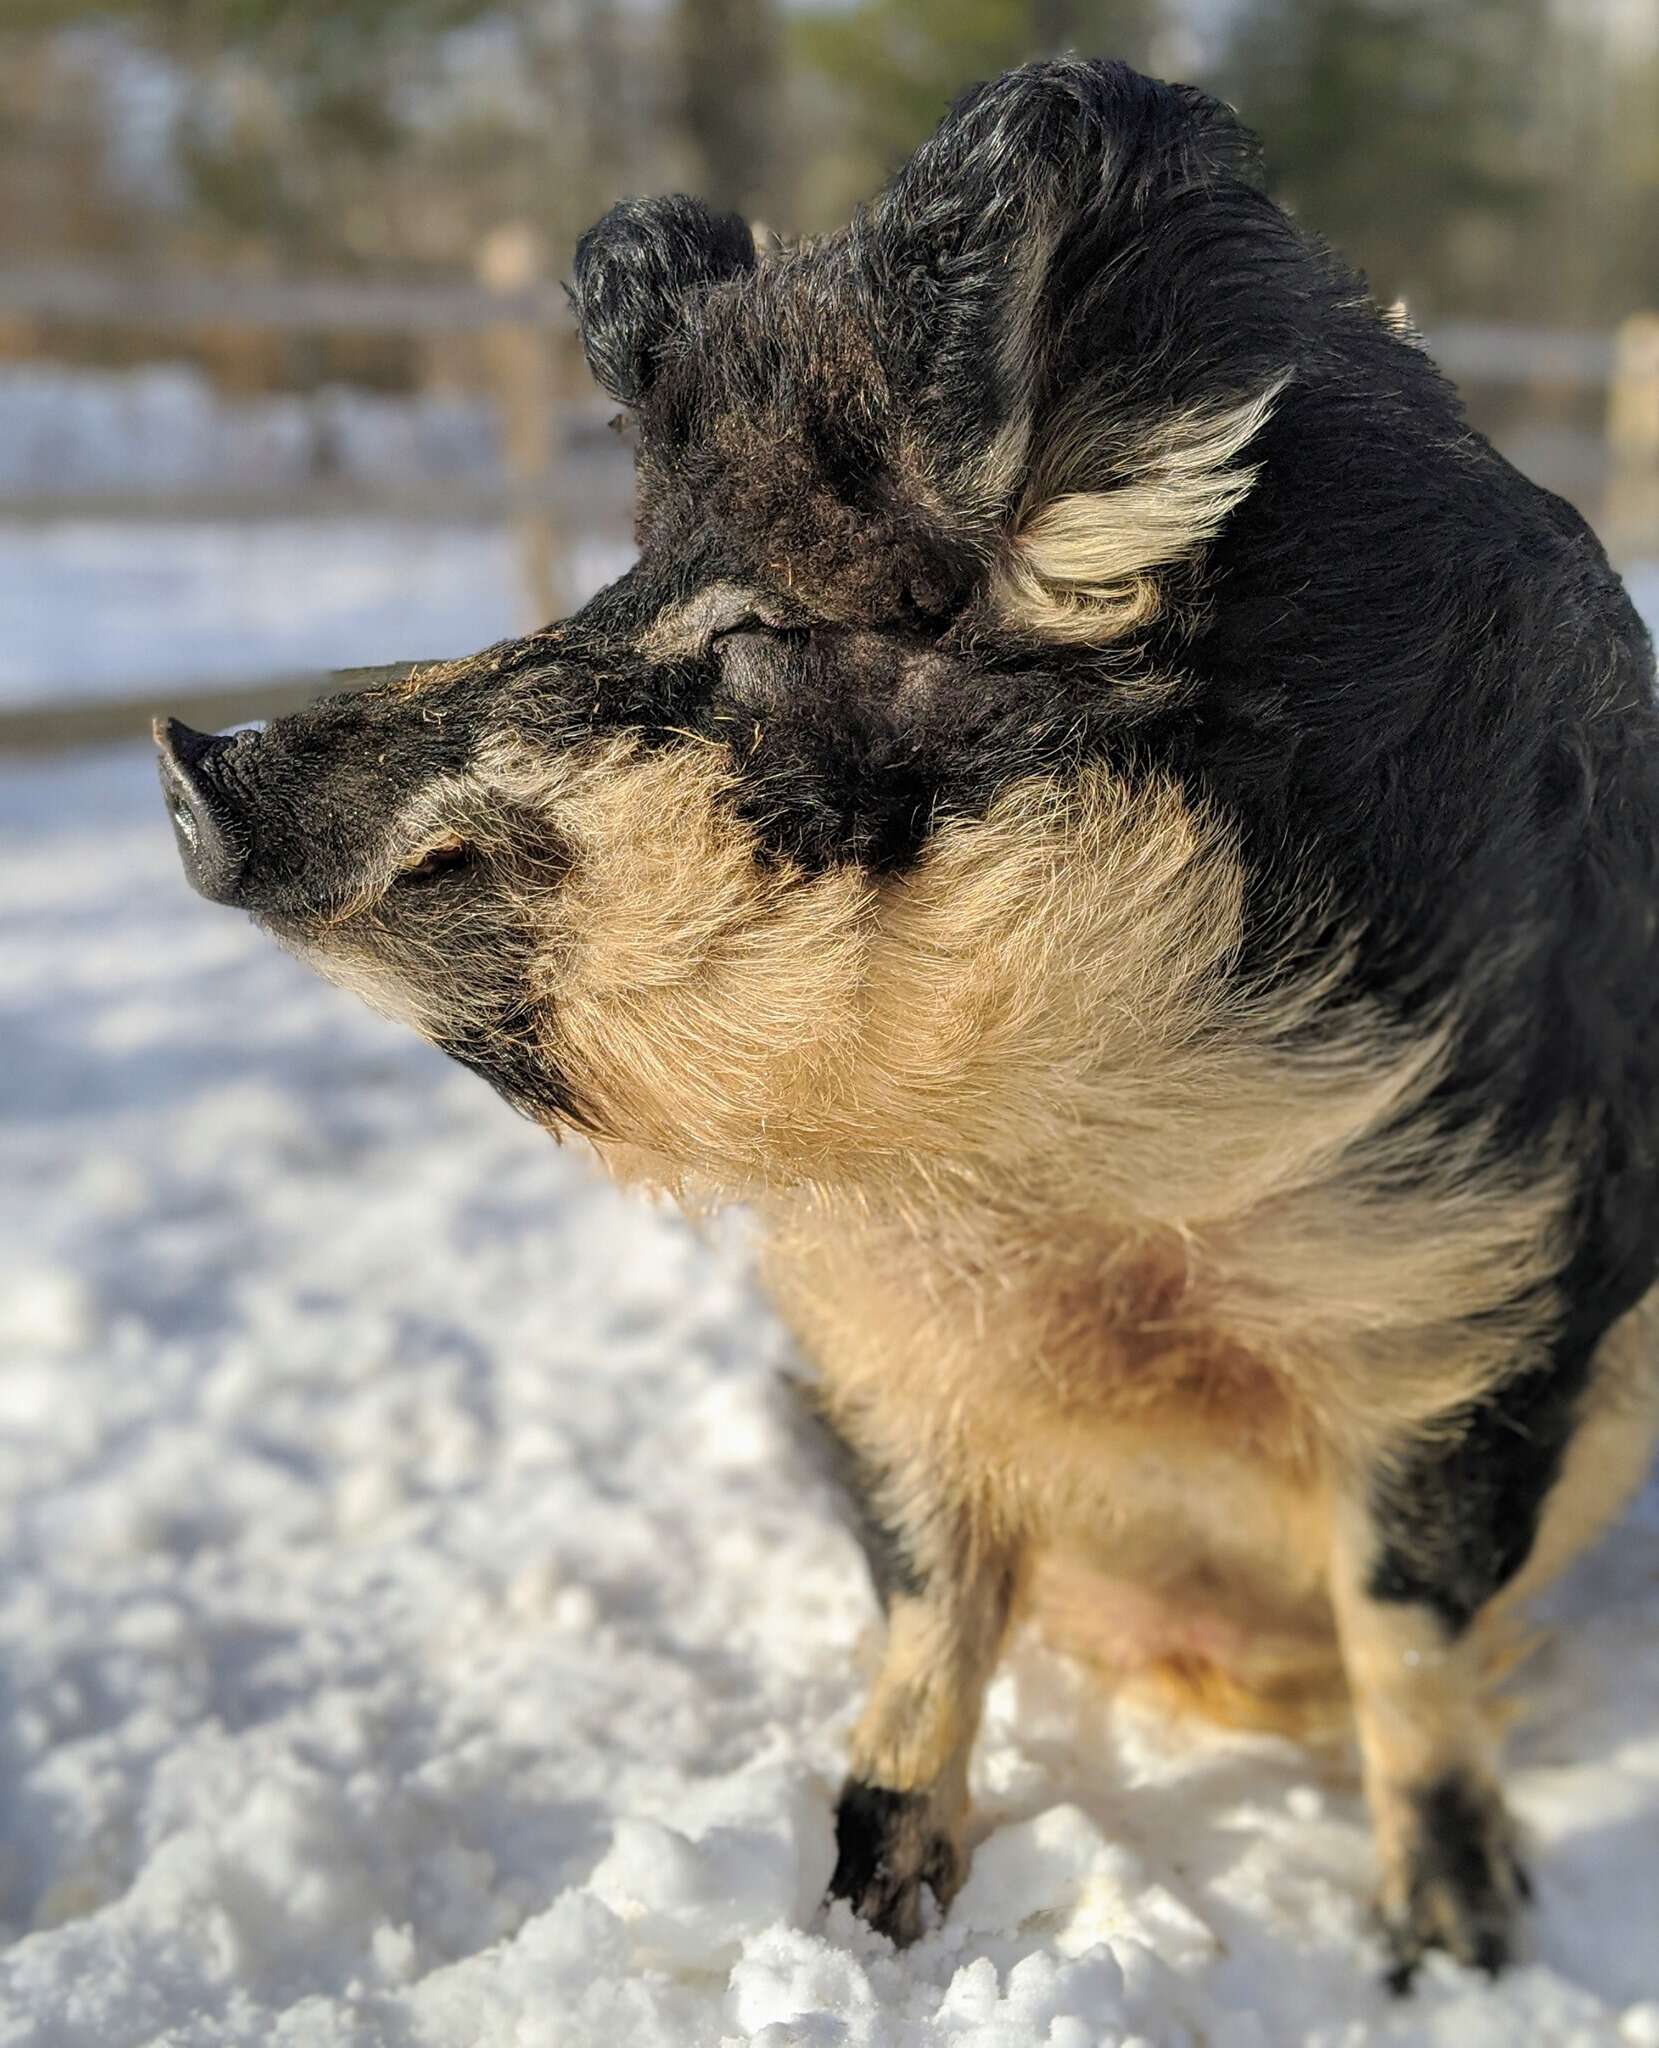 Angus the rescued Mangalitsa pig with a fluffy coat